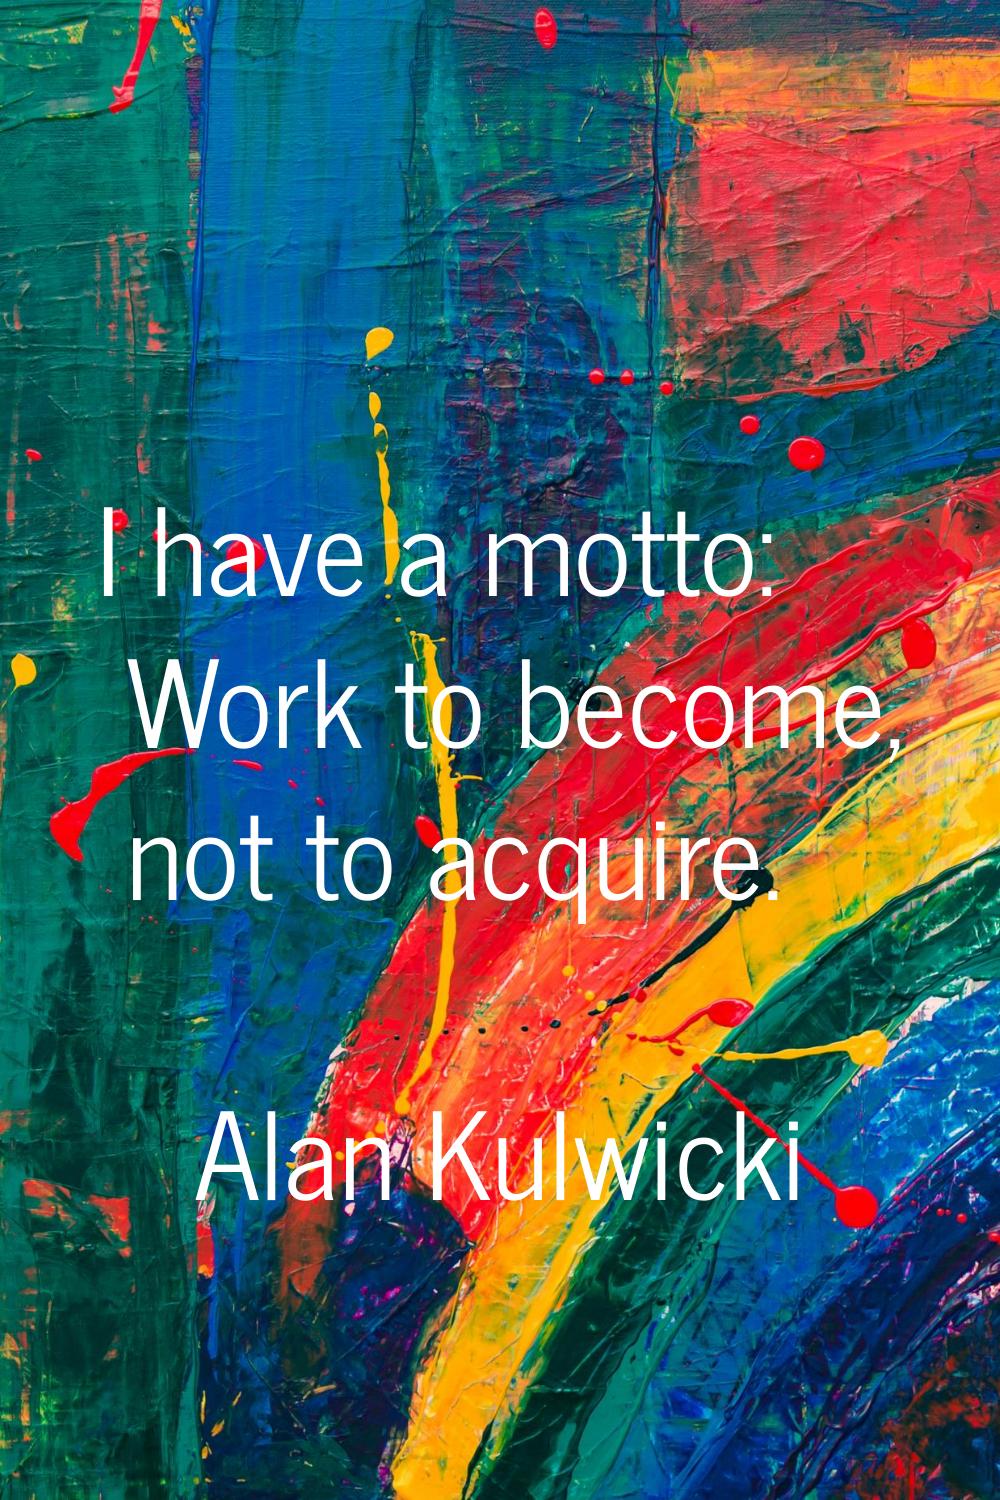 I have a motto: Work to become, not to acquire.